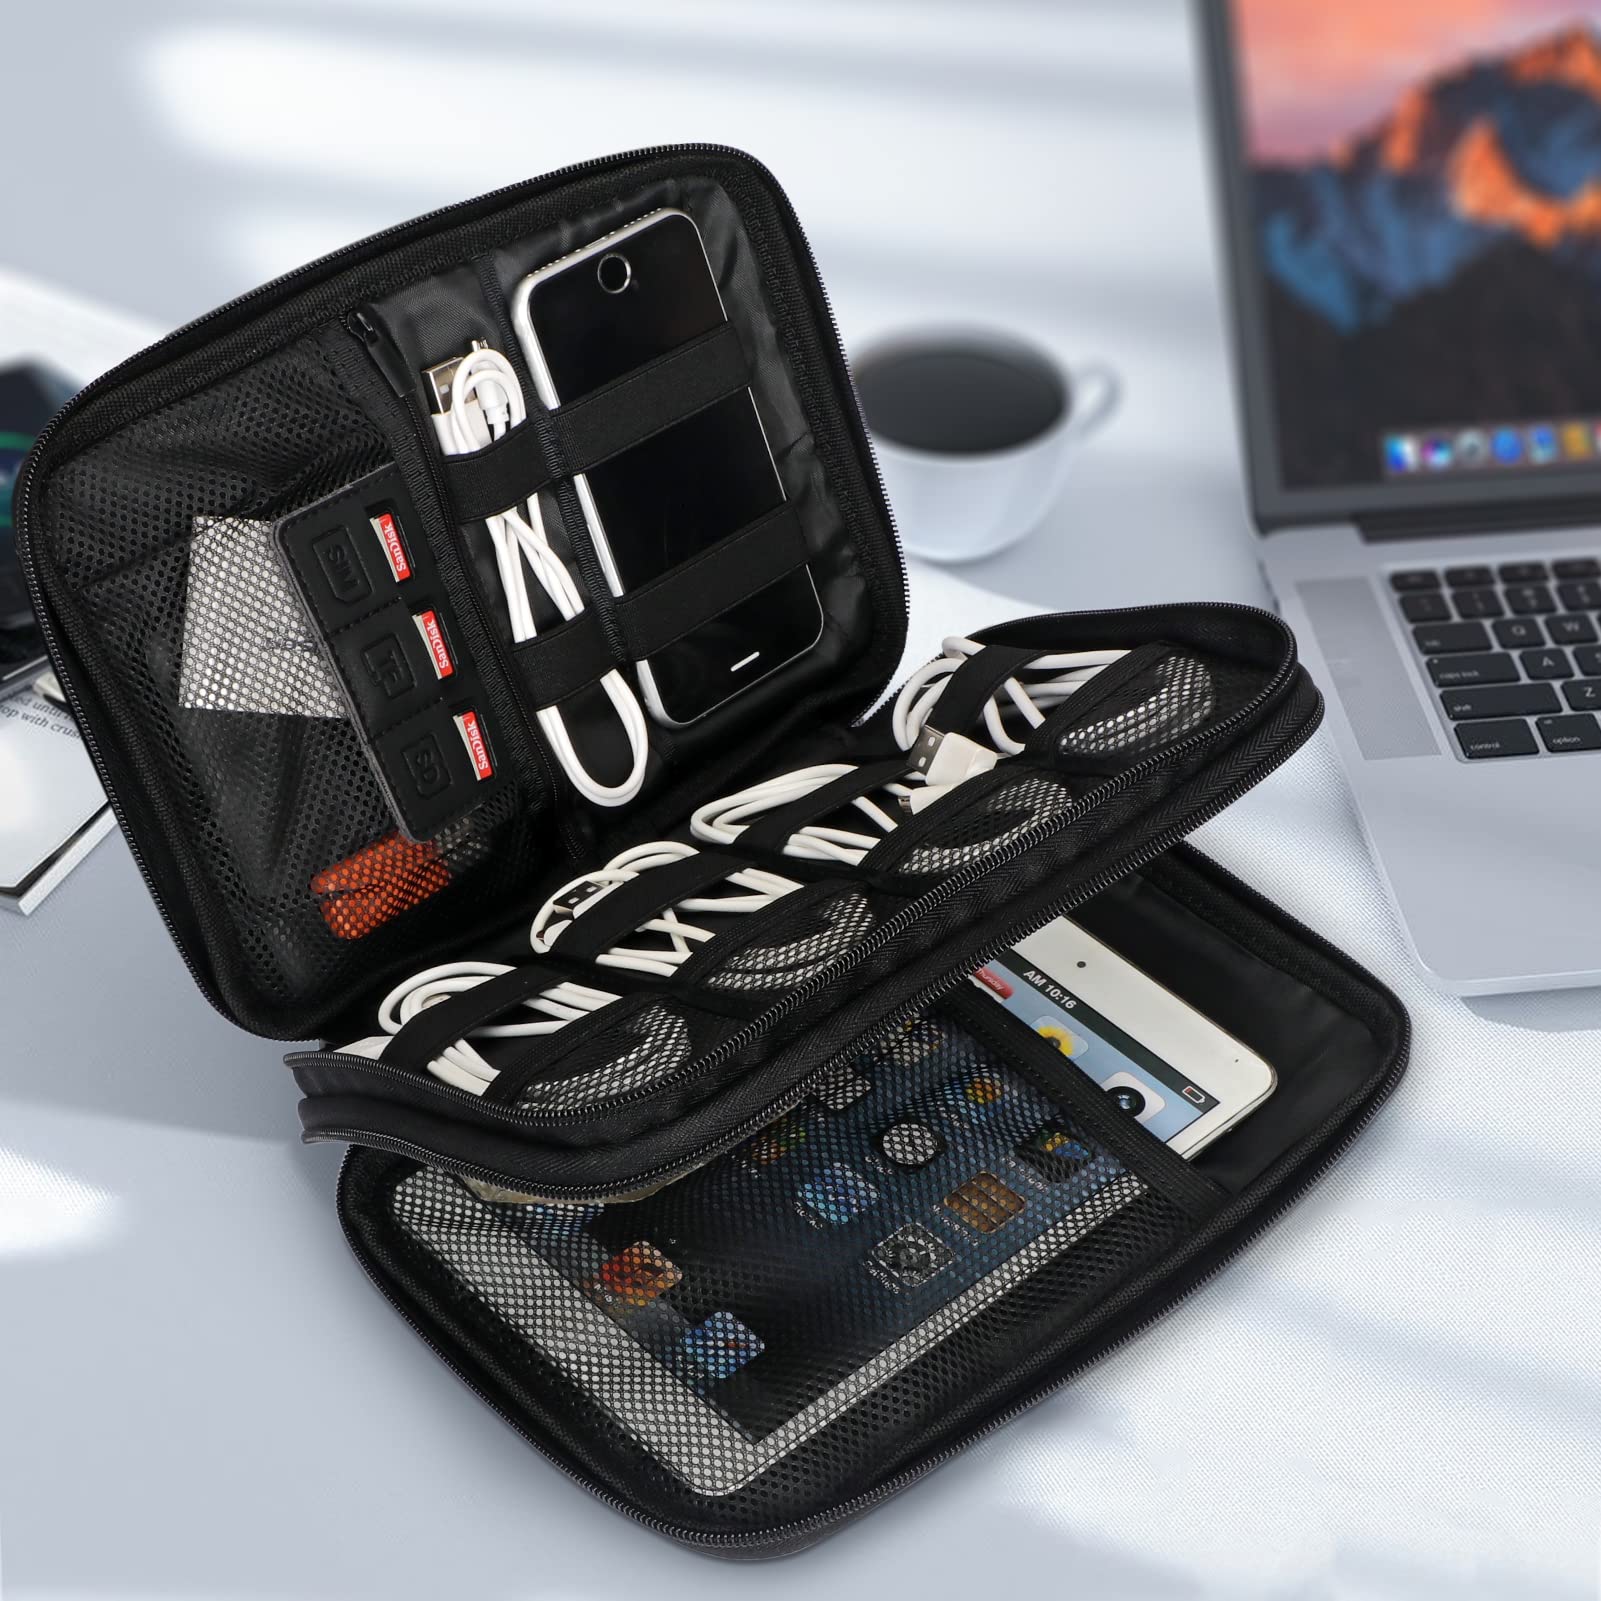 FYY Electronic Organizer, Travel Cable Organizer Bag Pouch Electronic Accessories Carry Case Portable Waterproof Double Layers All-in-One Storage Bag for Cable, Cord, Charger, Phone, Hard Drive,-Black